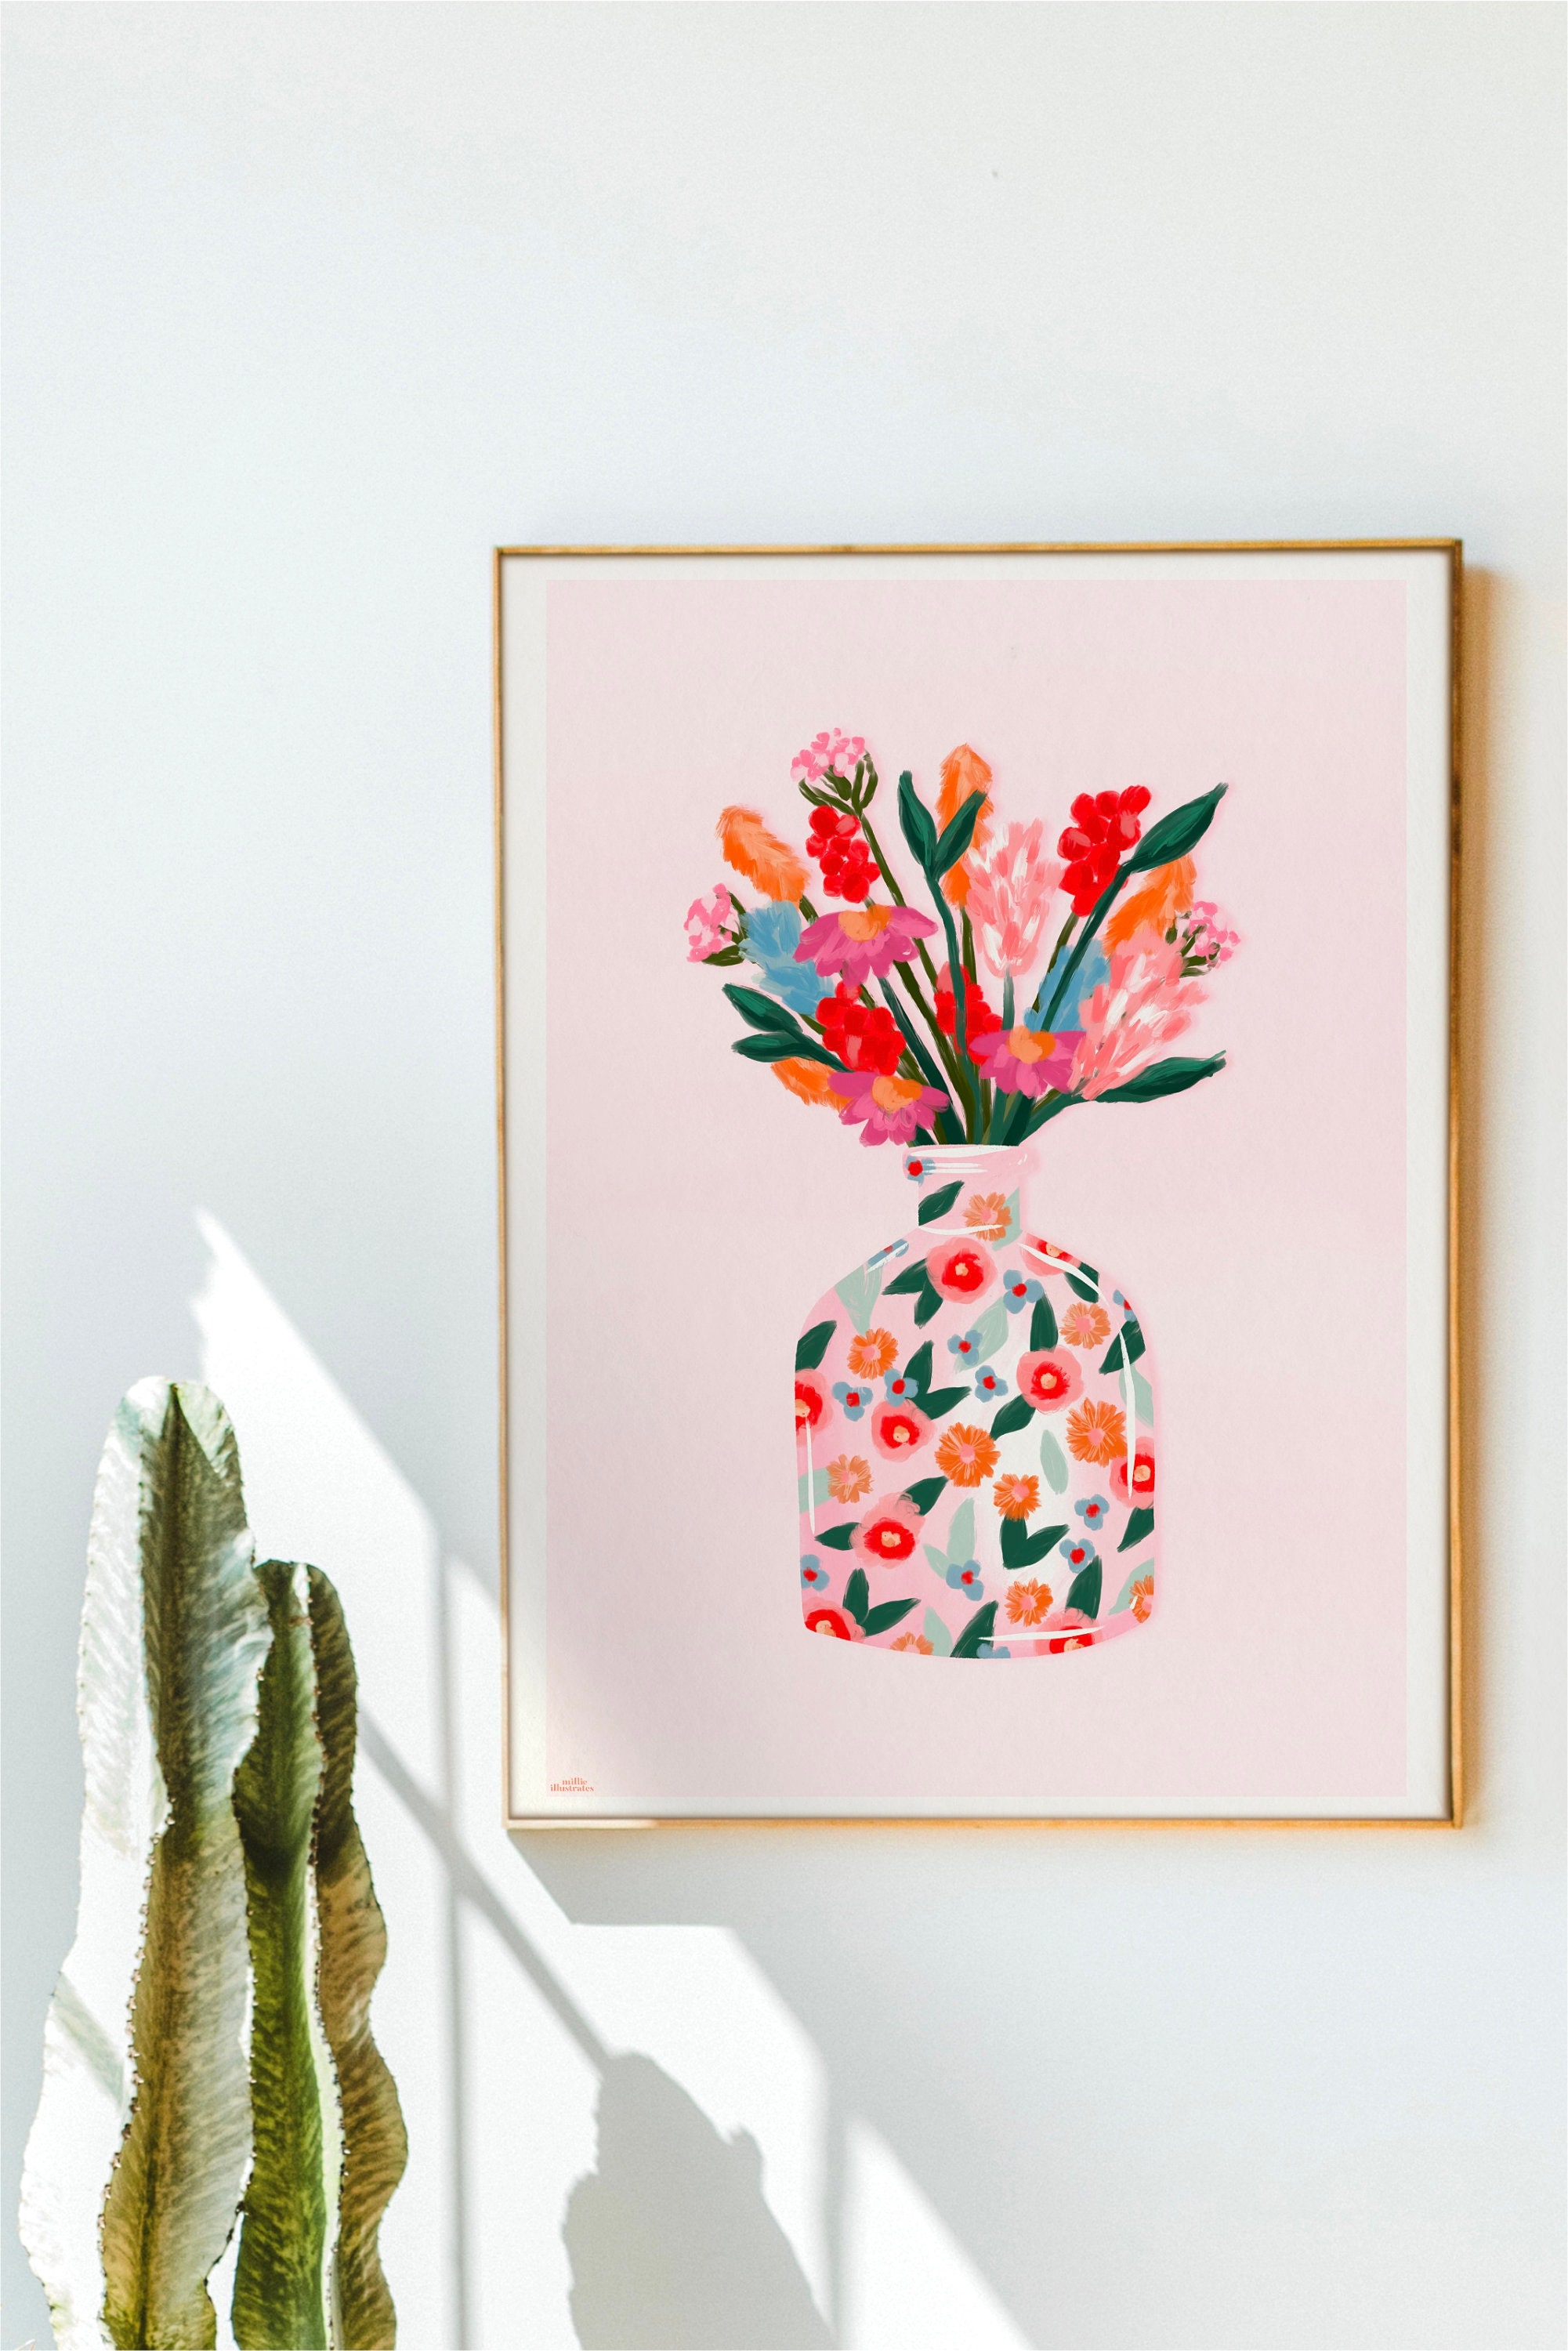 Floral Art Print Bright Florals Vase Print Abstract Floral - Etsy